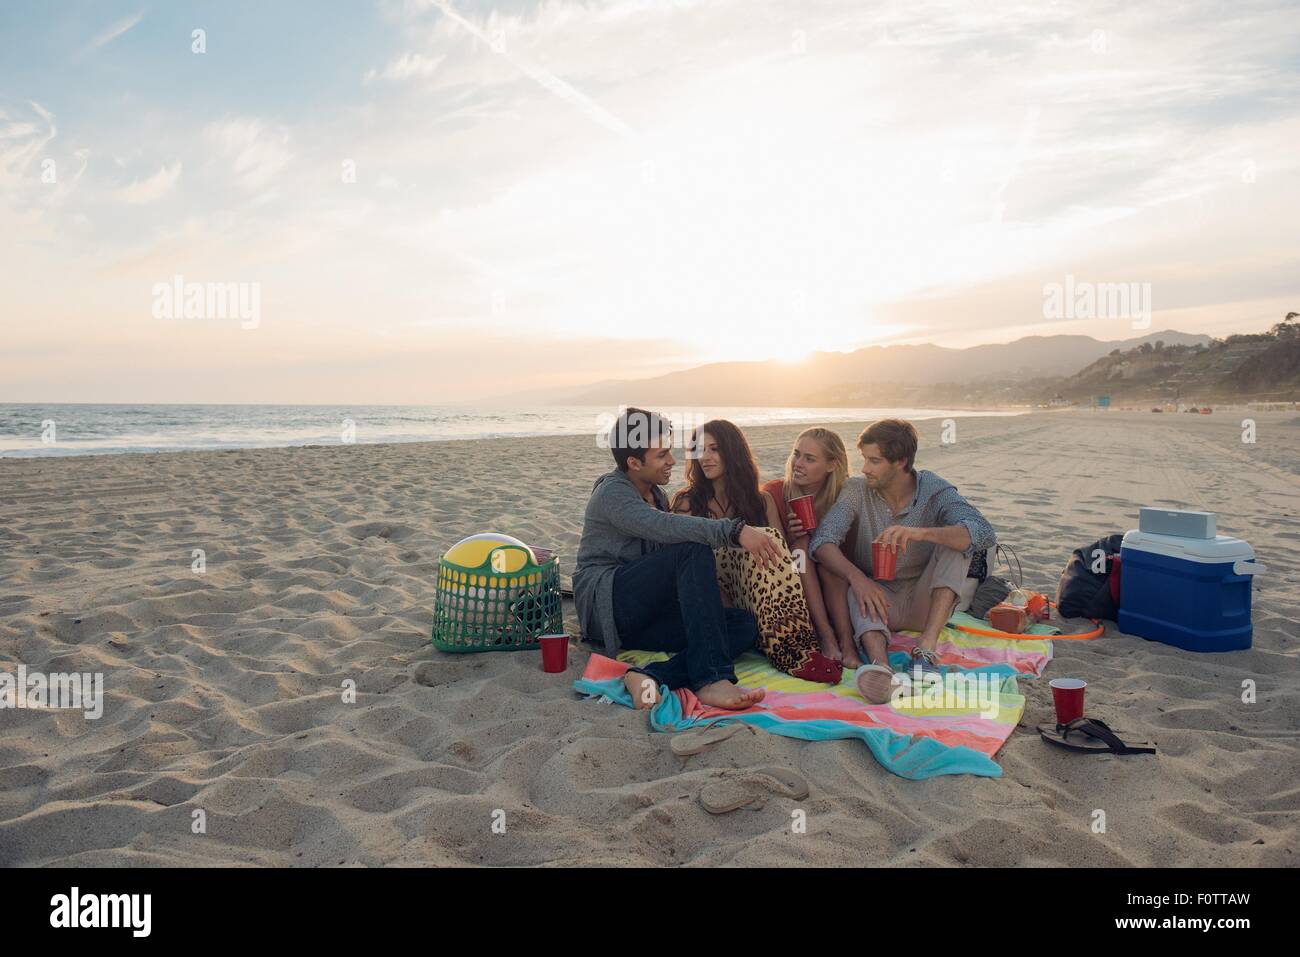 Group of friends having picnic on beach Stock Photo